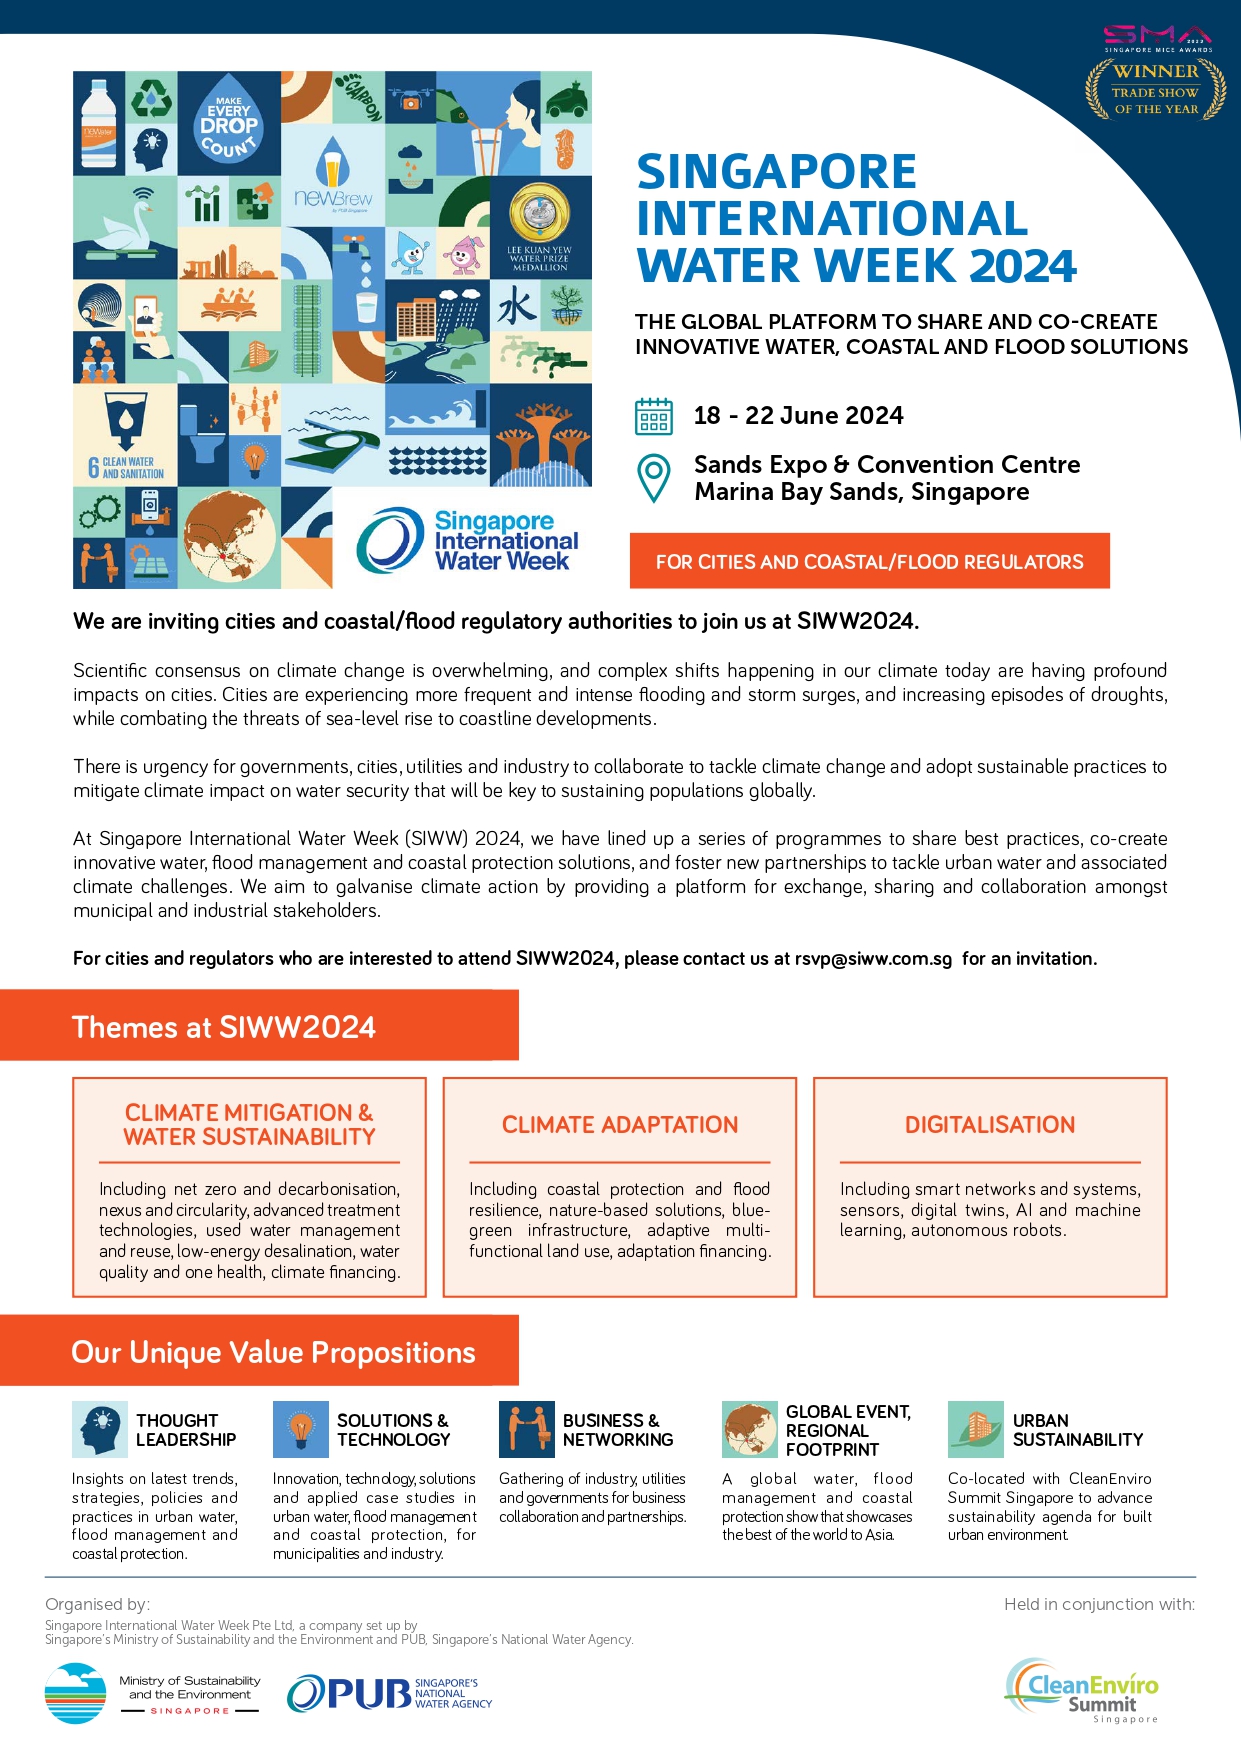 SIWW2024 –  An Invitation to Cities